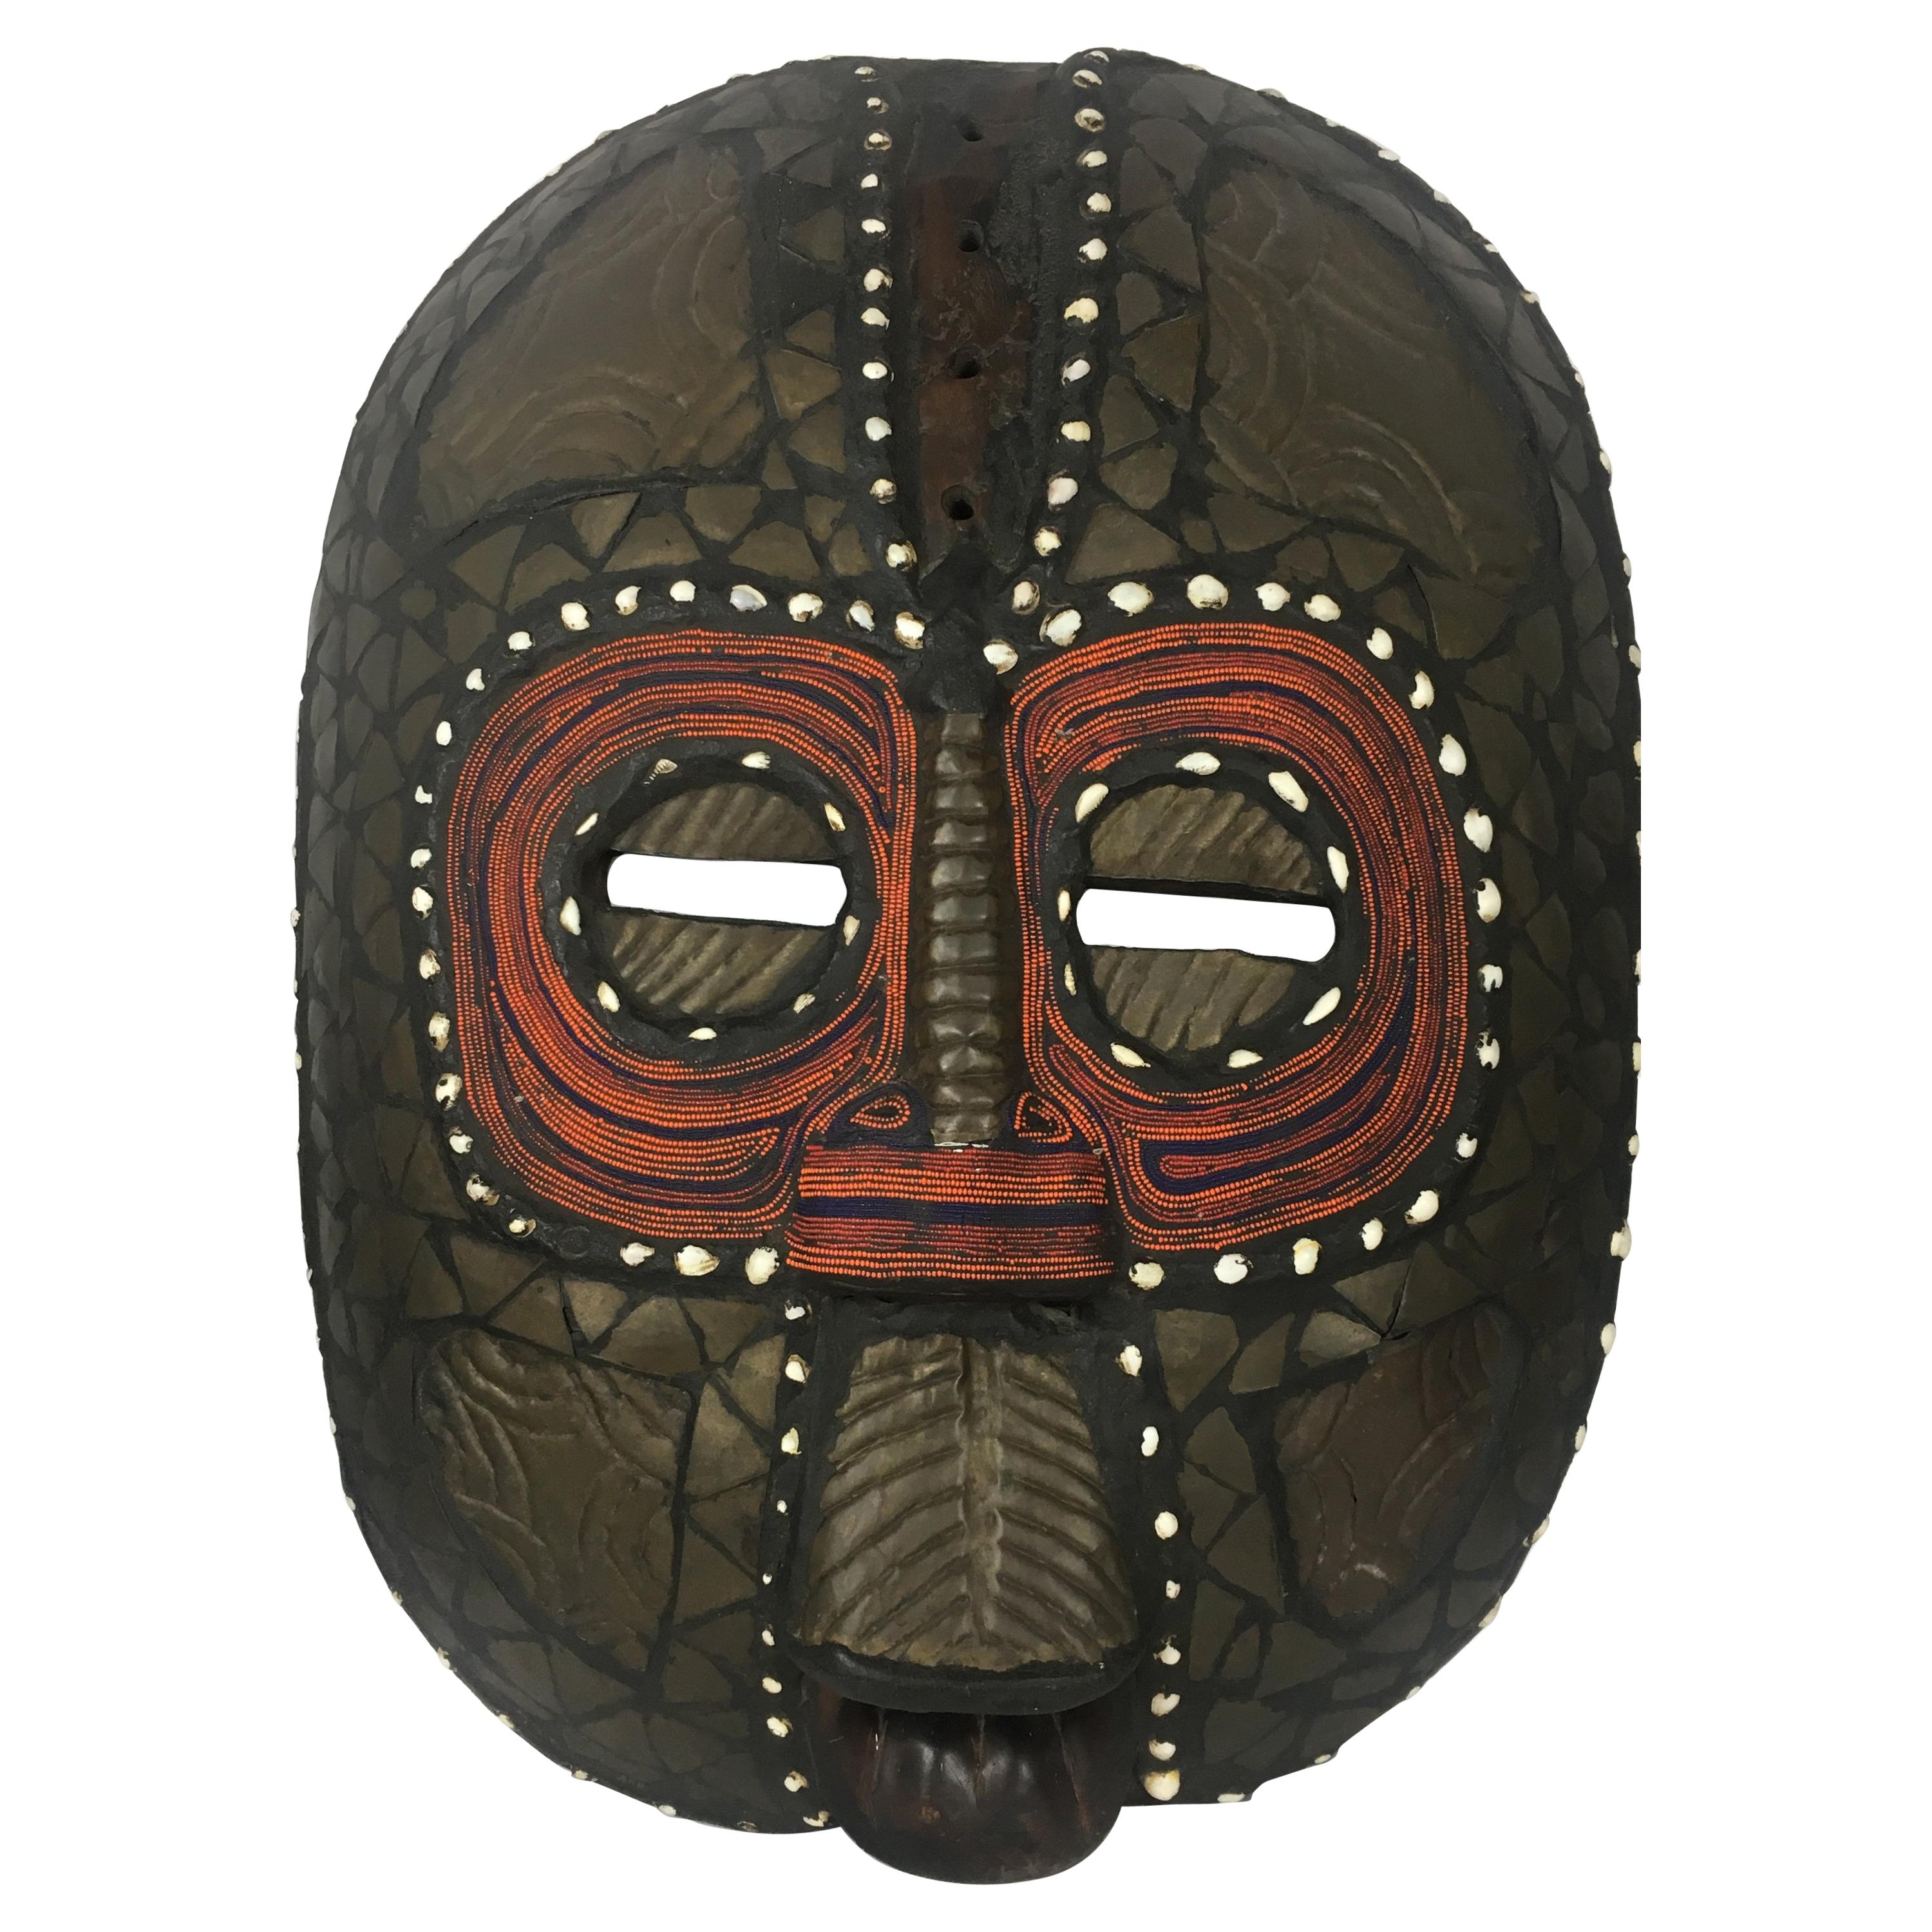 Very Large Mid-20th Century African Tribal Mask